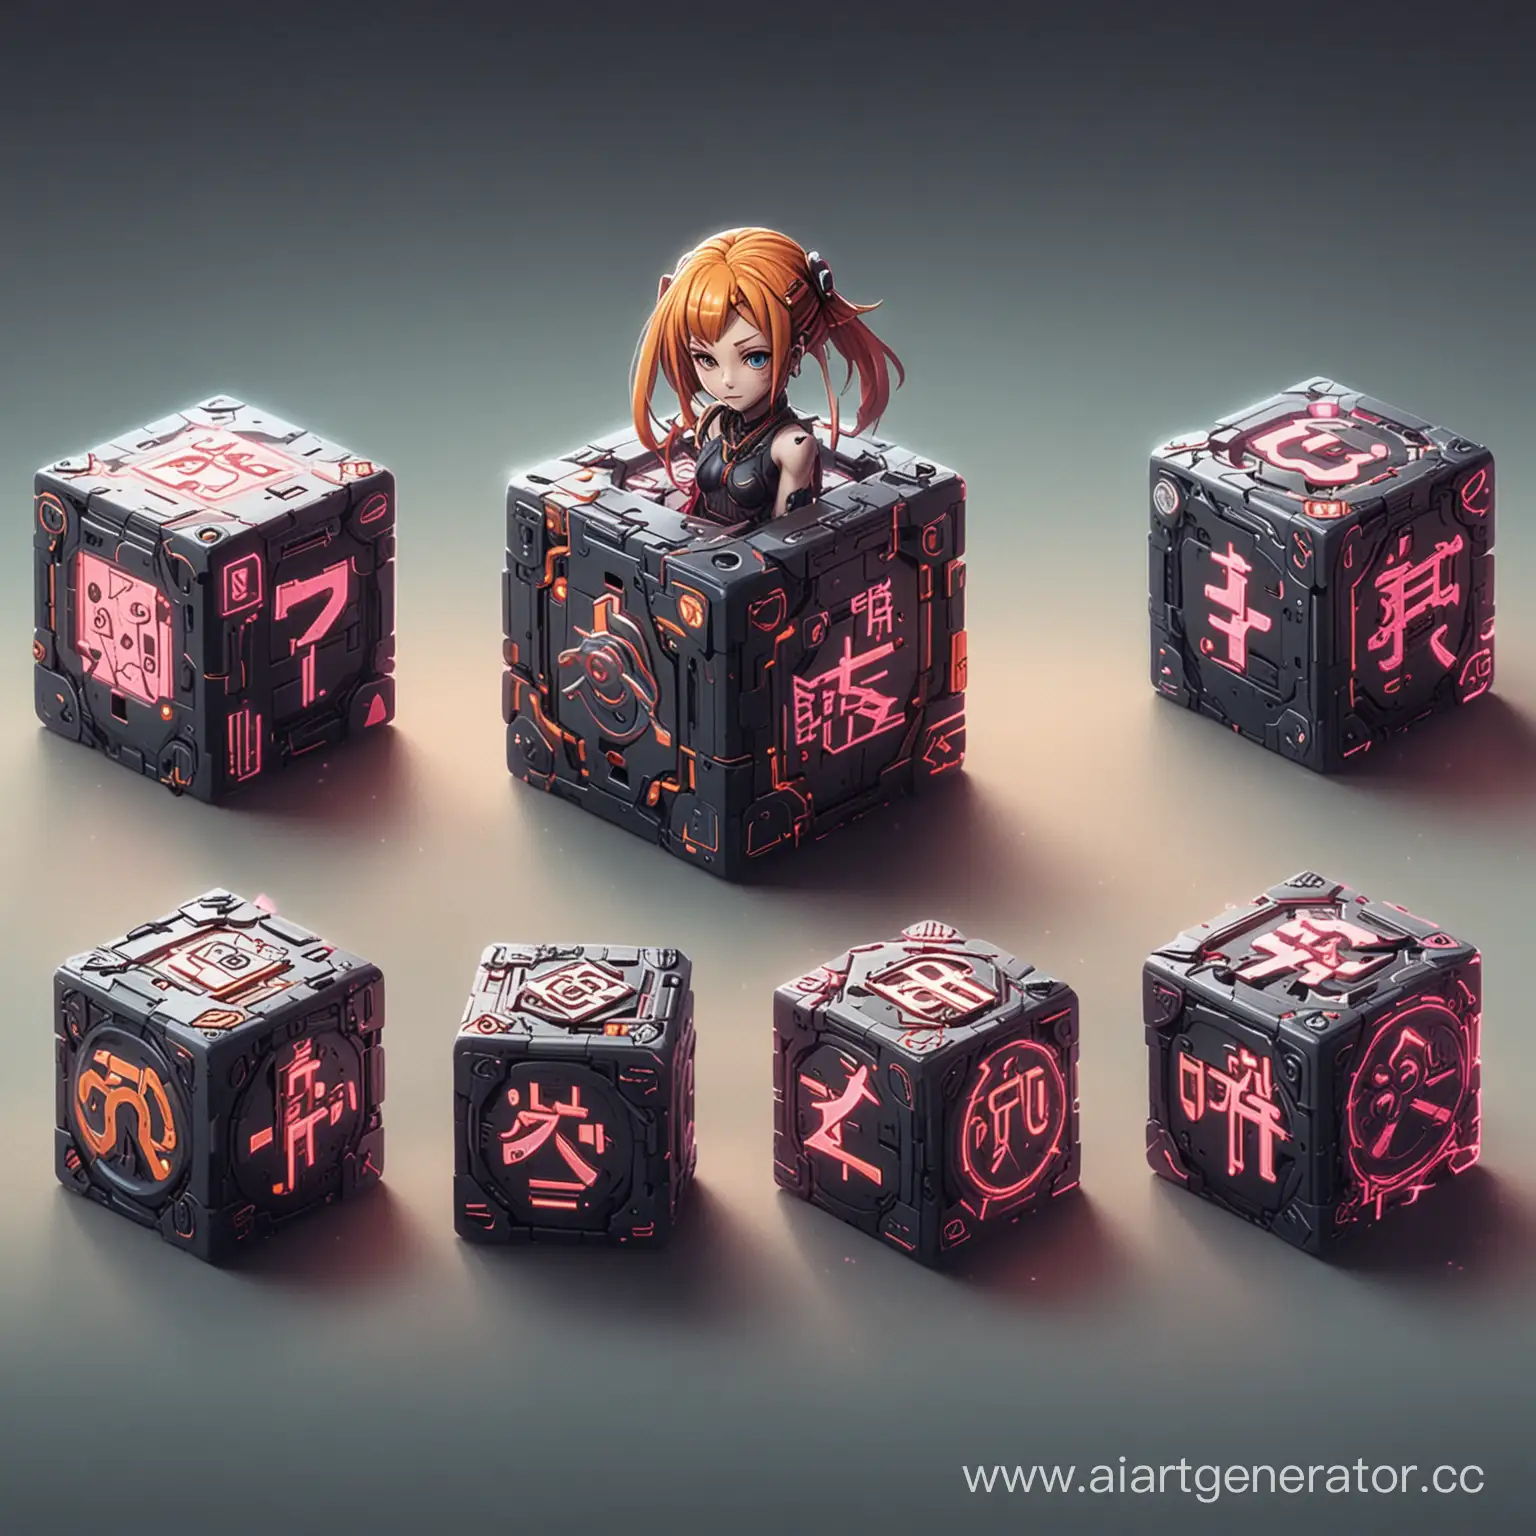 Cyberpunk-Anime-Characters-Playing-Gambling-Games-with-Neon-Cubes